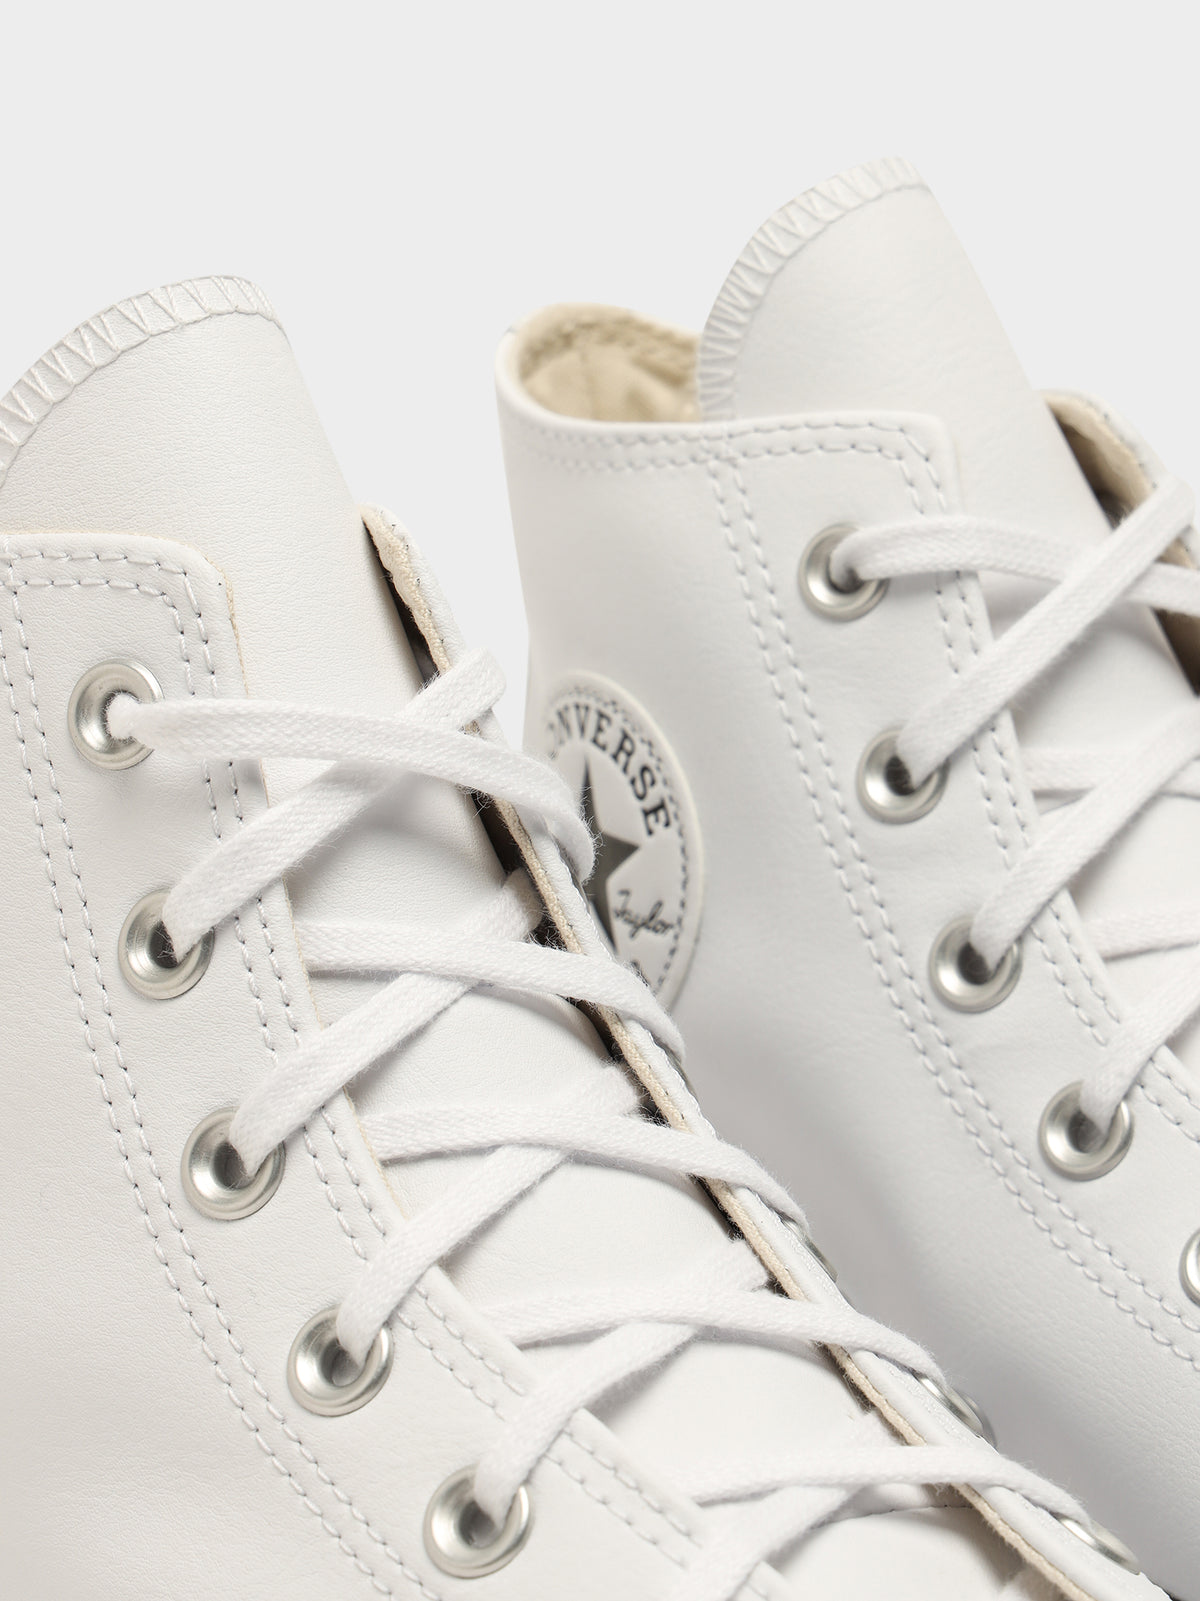 Womens Chuck Taylor All Star Lift Canvas High Top in White